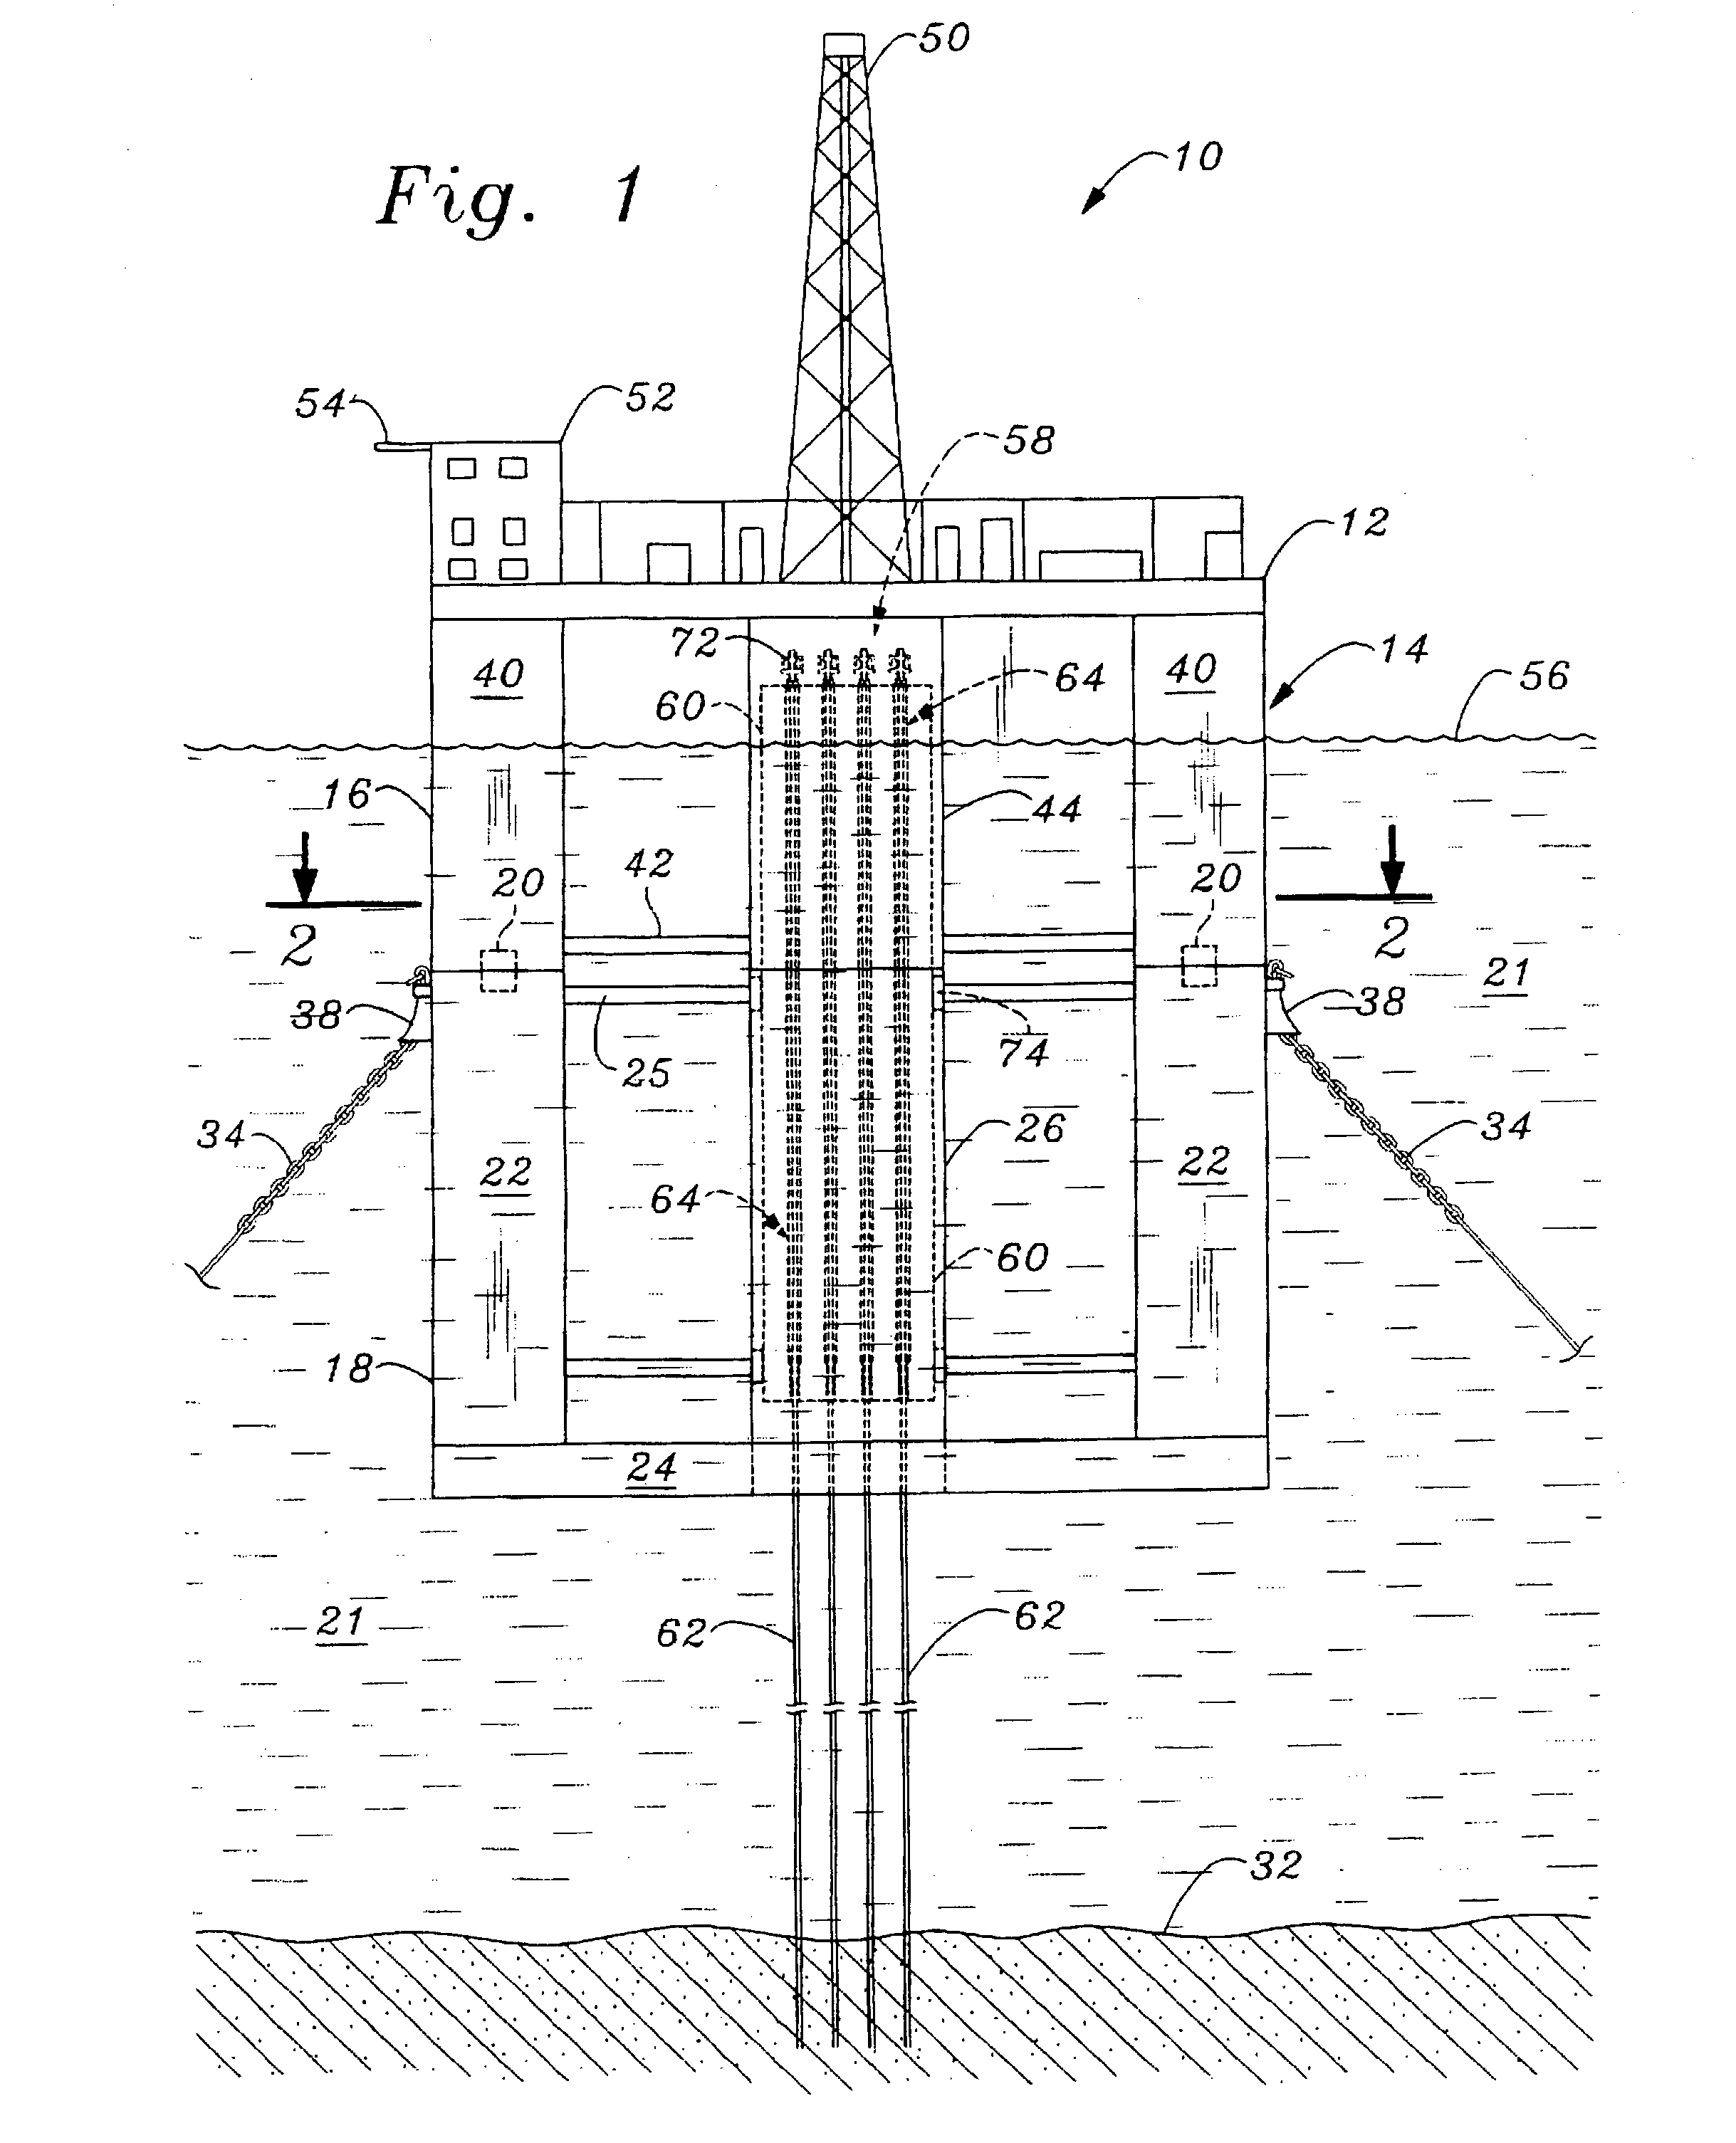 Riser support system for use with an offshore platform